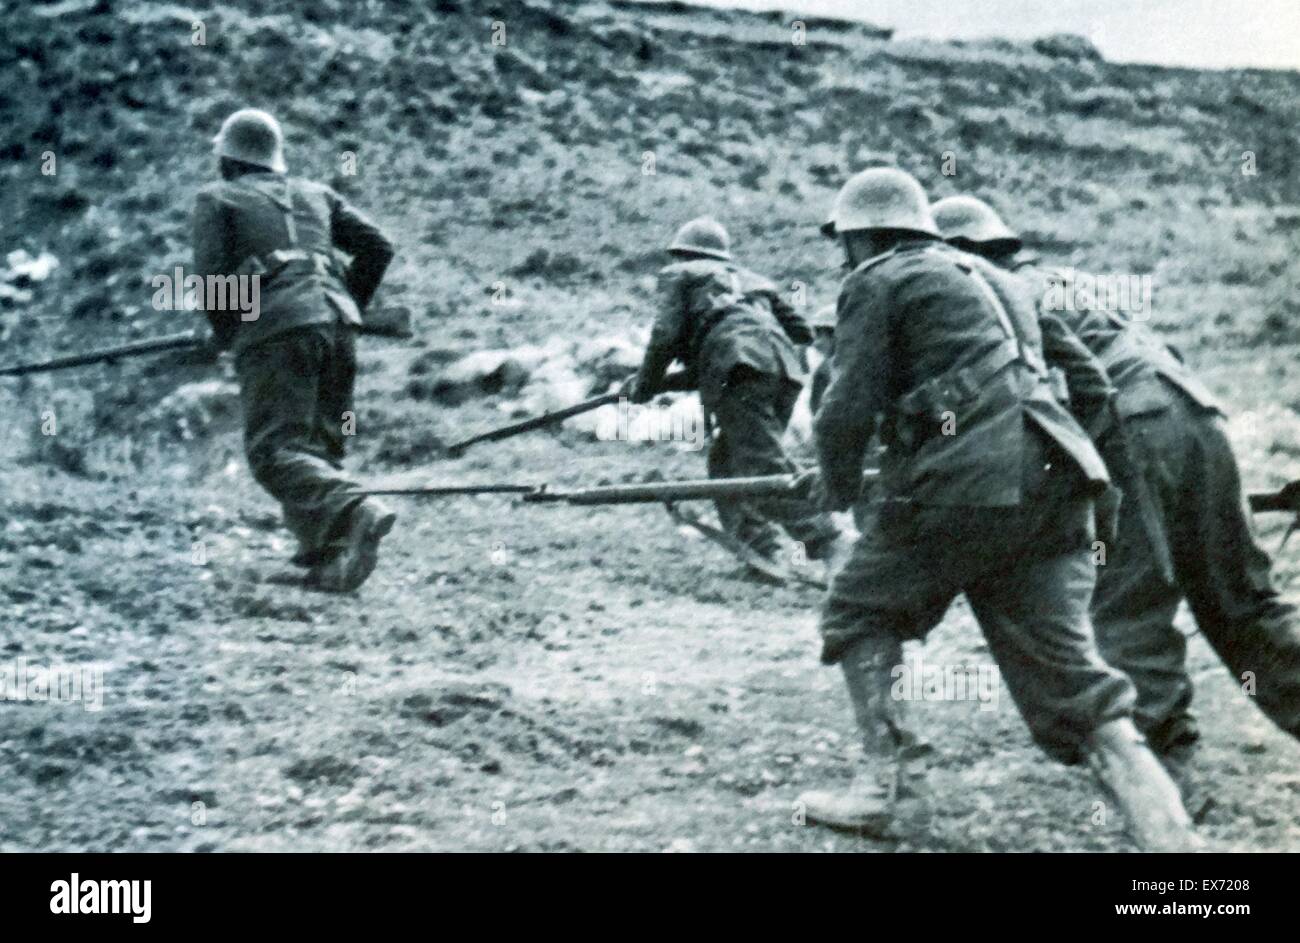 Nationalist soldiers advance with bayonets drawn during a battle in the Spanish Civil War Stock Photo